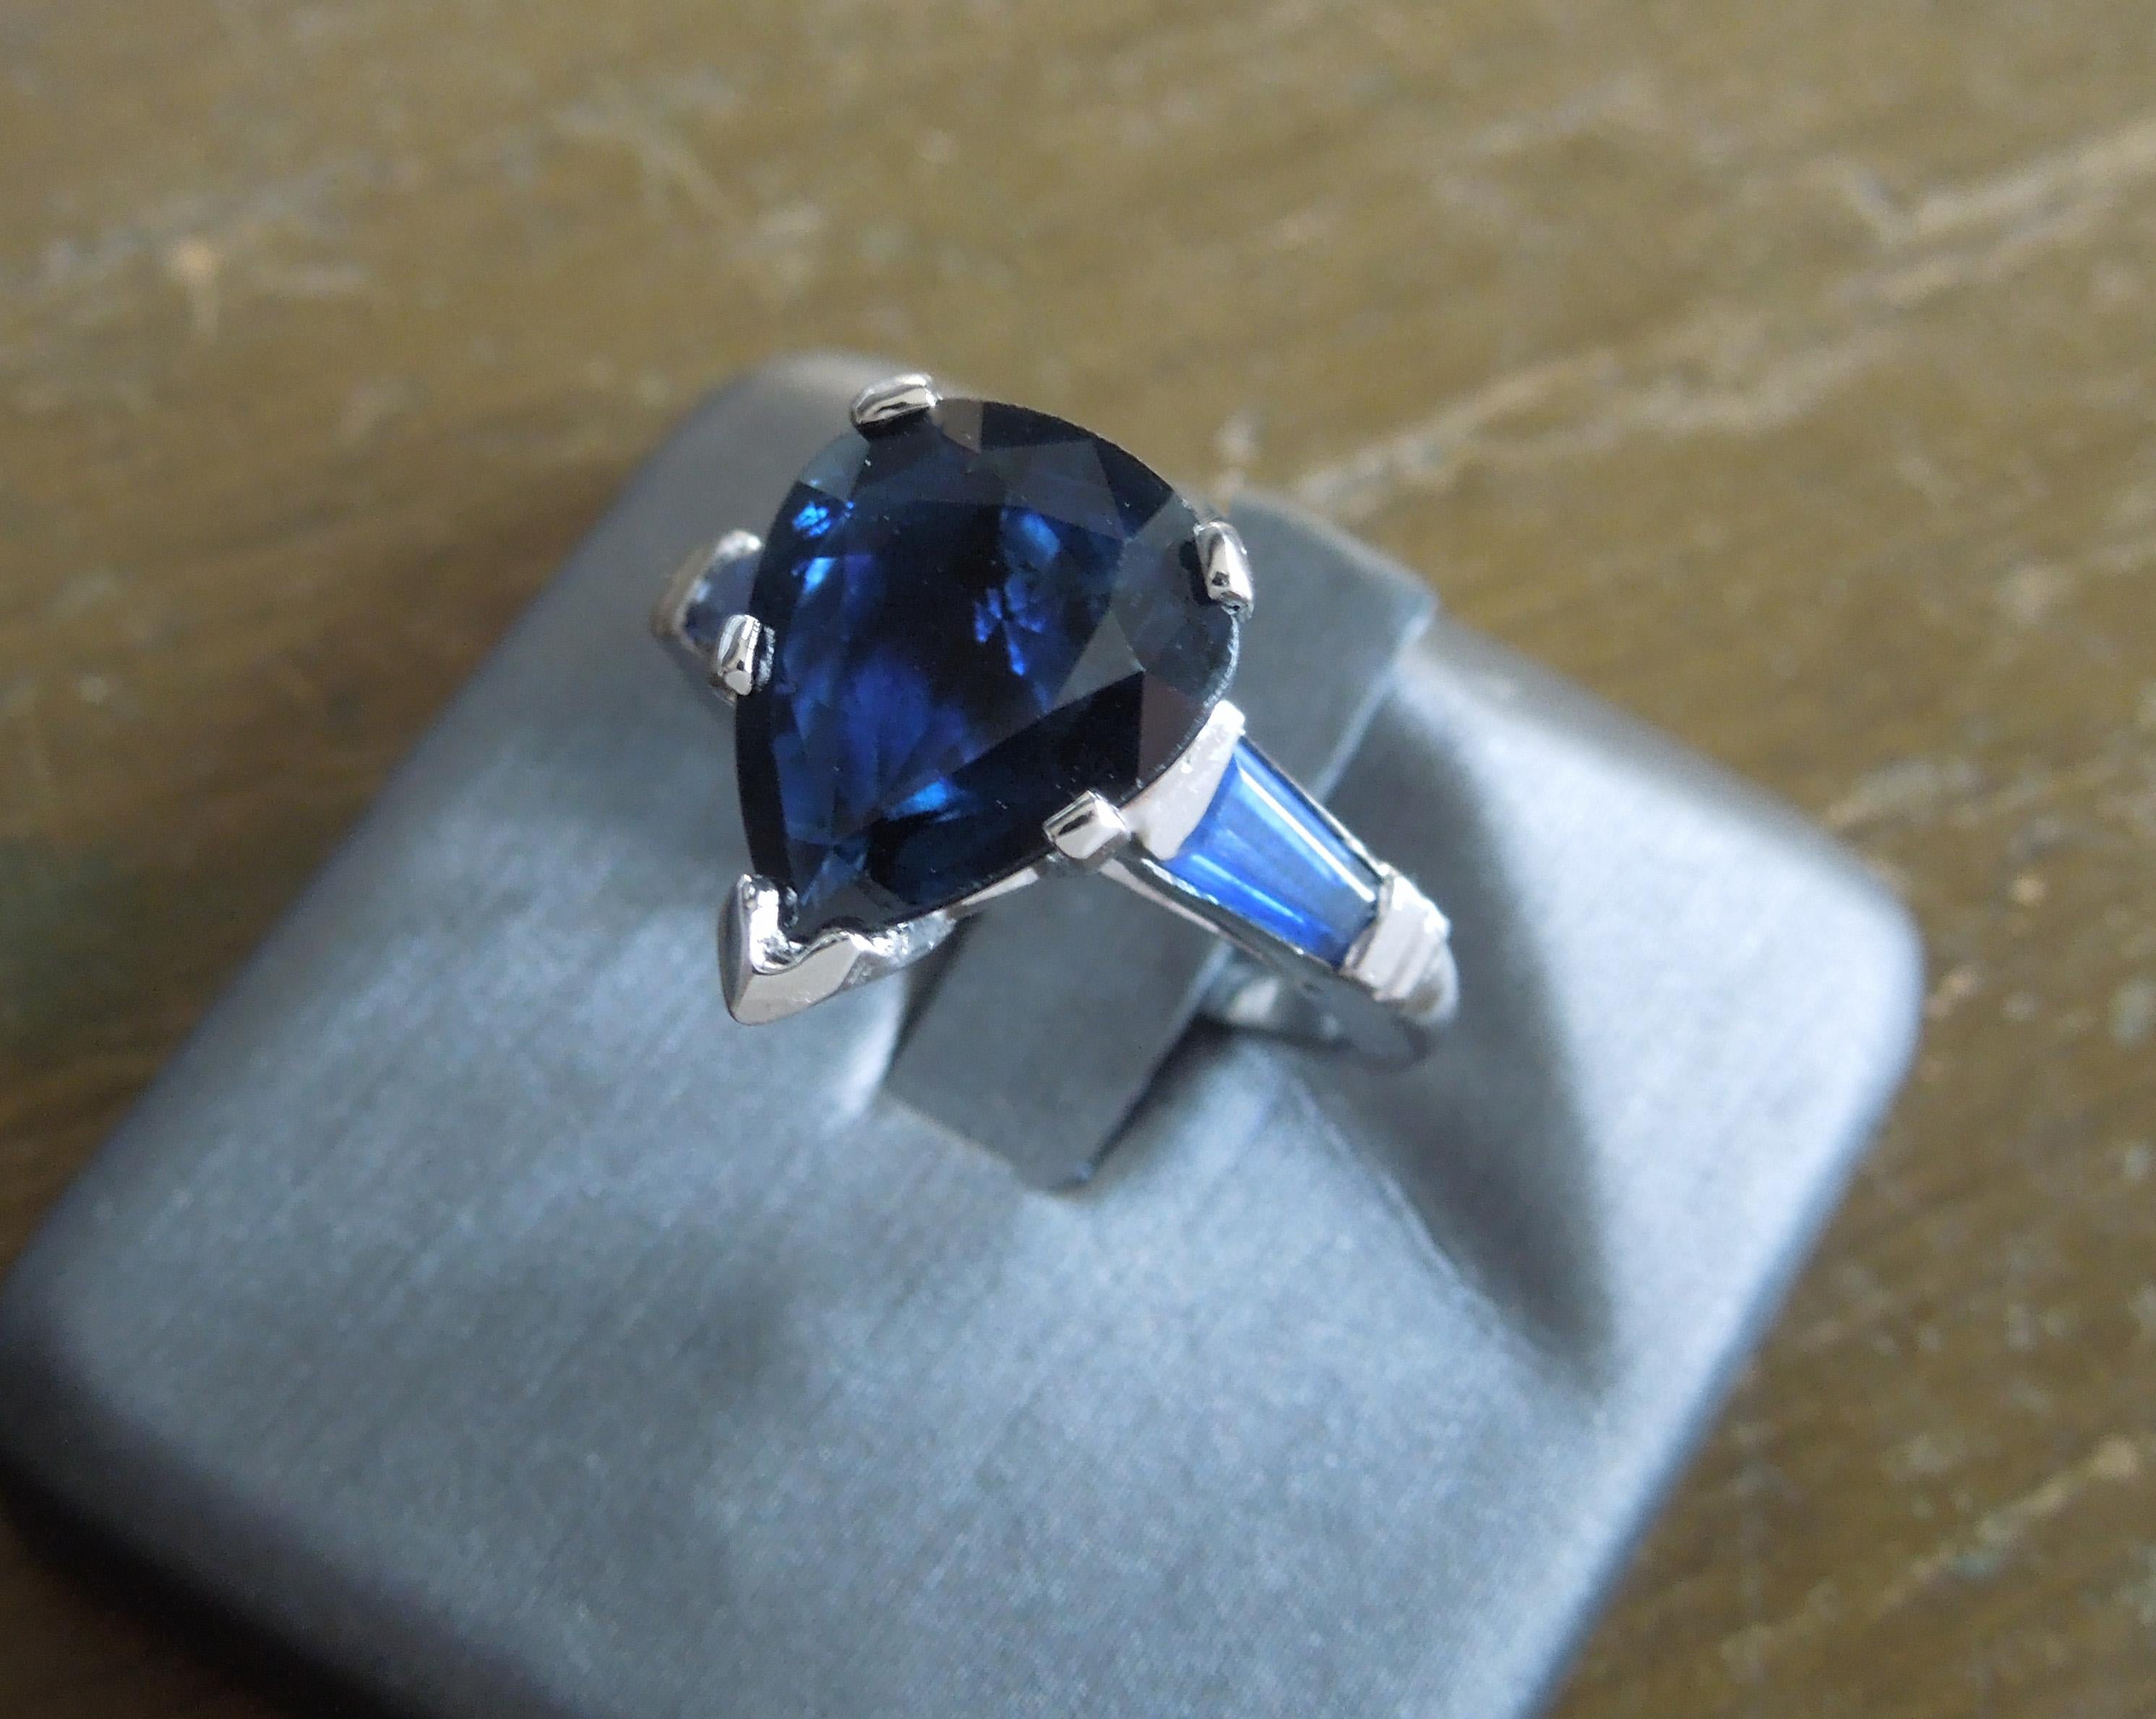 From our Beverly Hills Estate Collection, this Platinum Pear cut Sapphire & Baguette Ring features a central 3.37 carat Pear cut Natural Blue Sapphire at 12mm x 9.5mm at widest, secured in a 5-Prong setting with a secure V-Prong at tip of Sapphire.